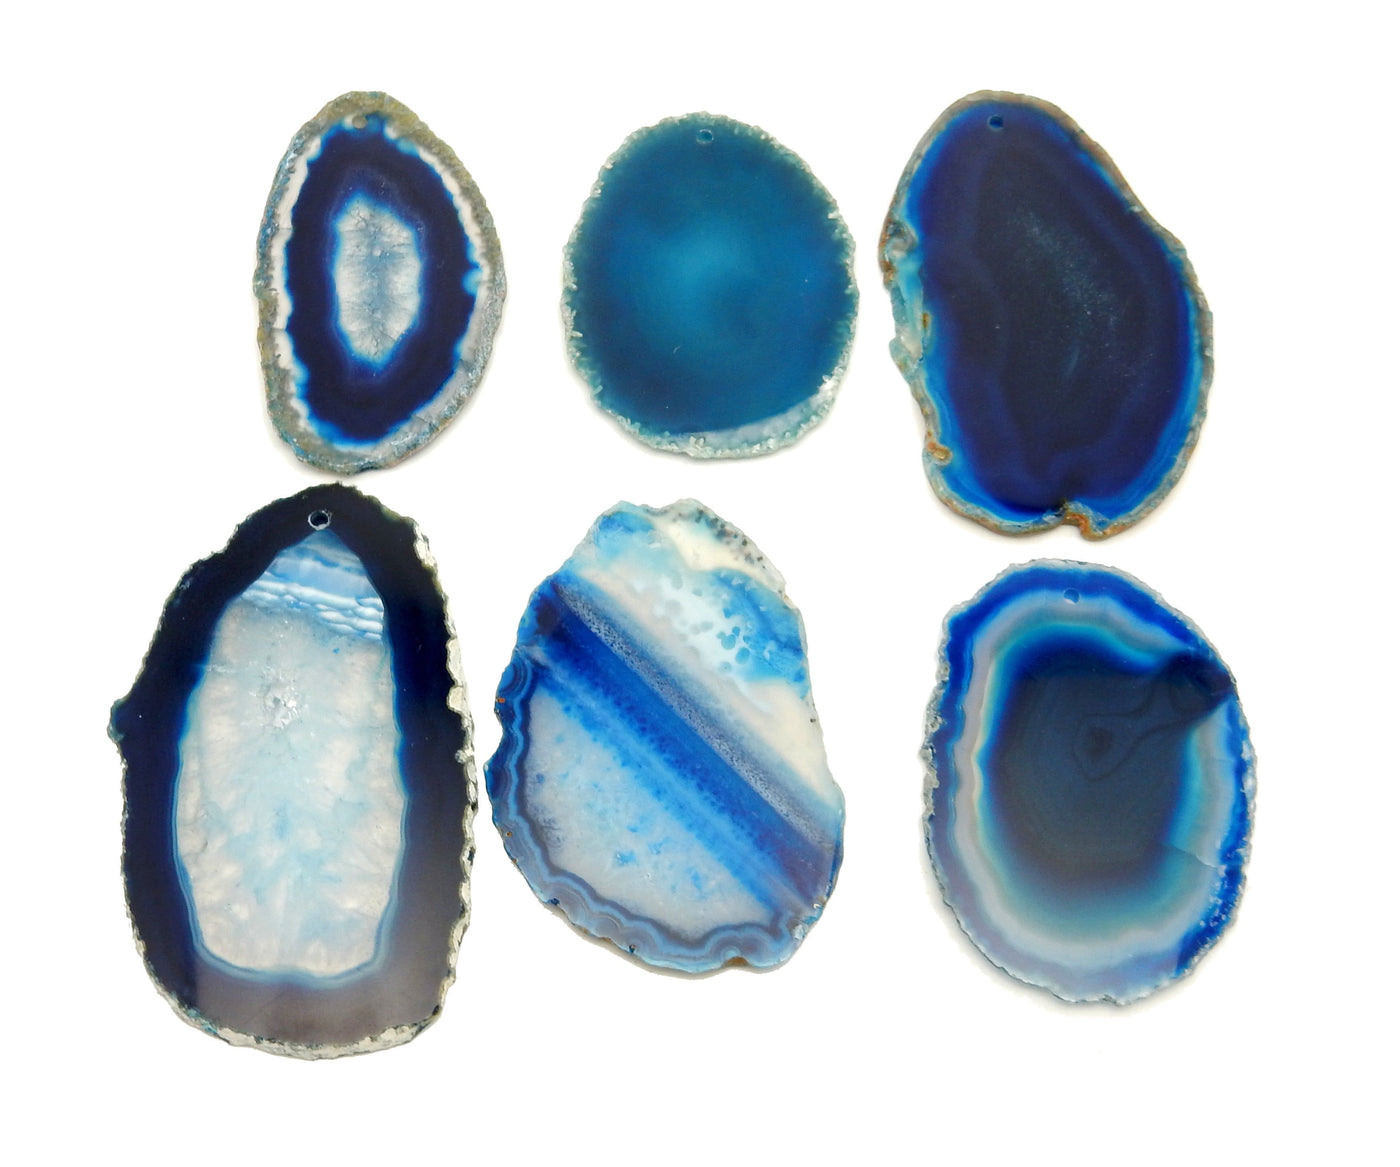 6 Blue Agate Slices Drilled on White Background.